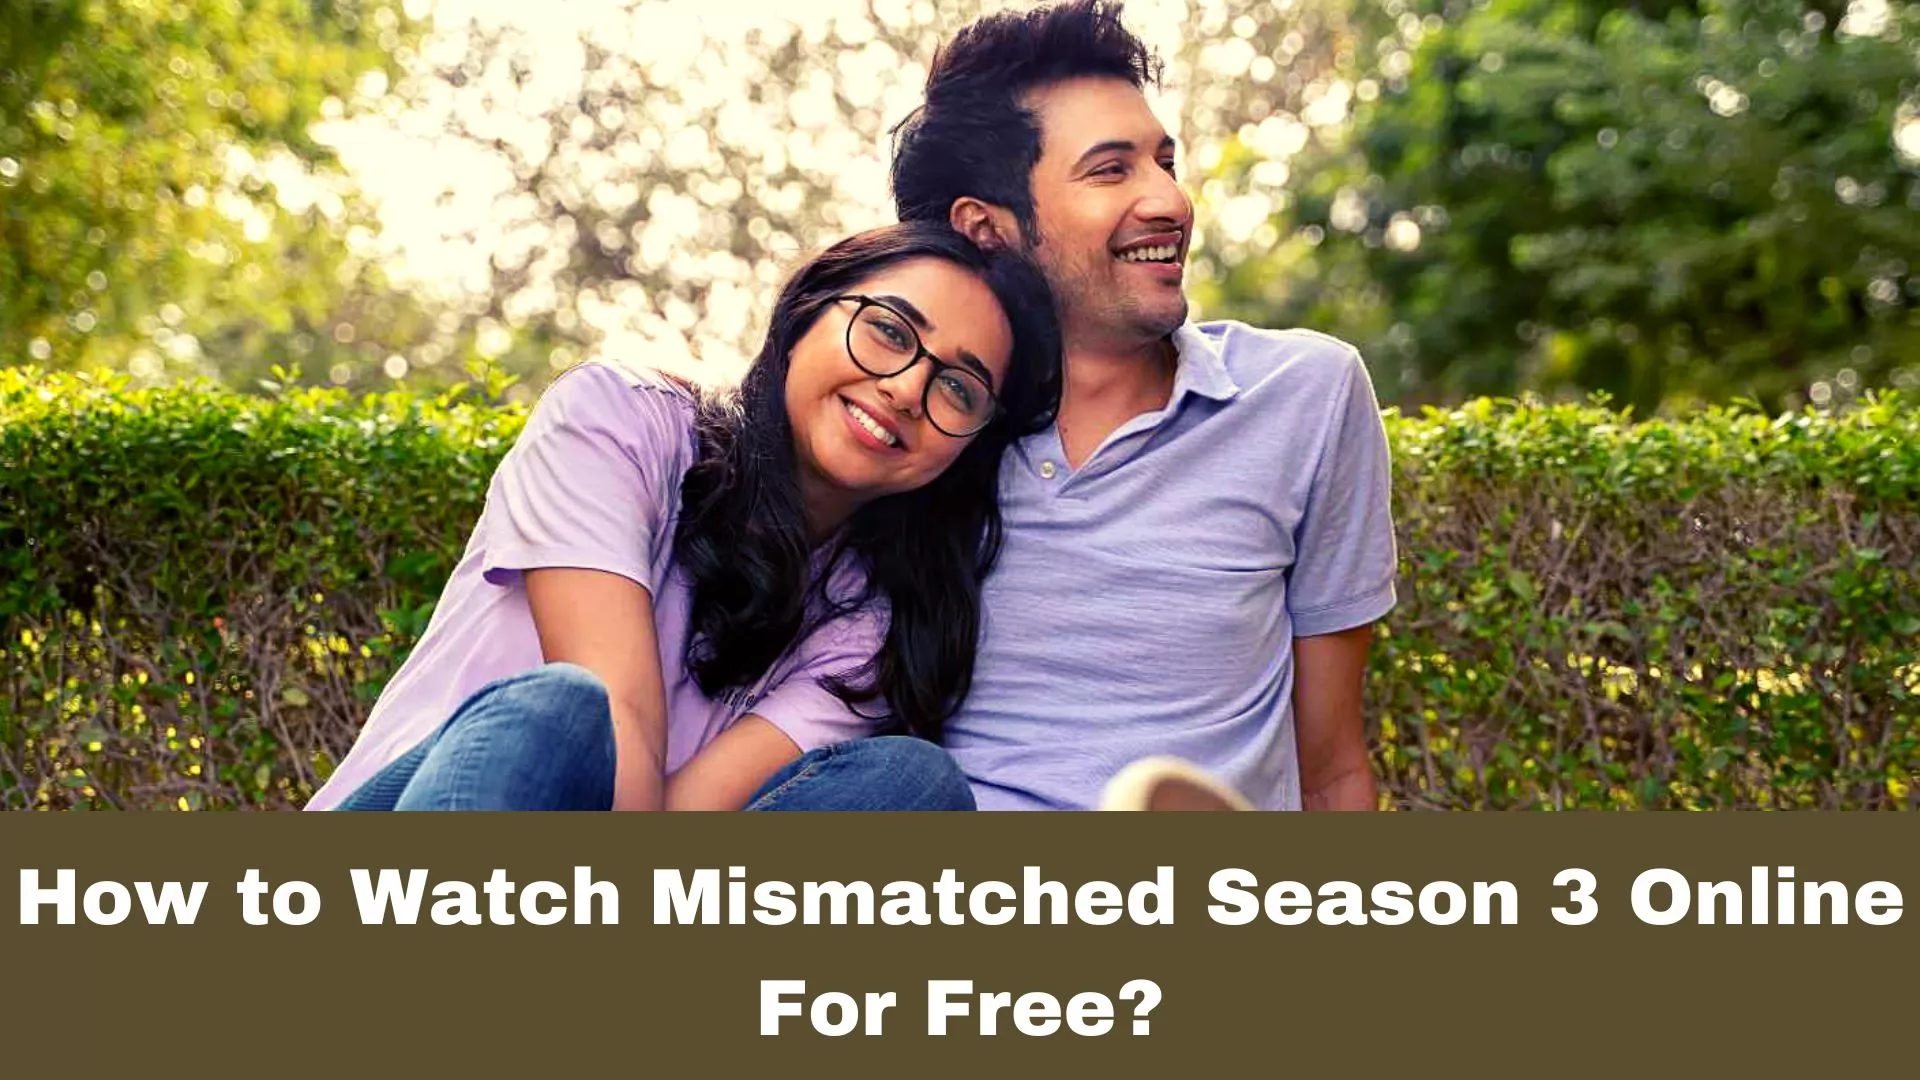 How to Watch Mismatched Season 3 Online For Free?